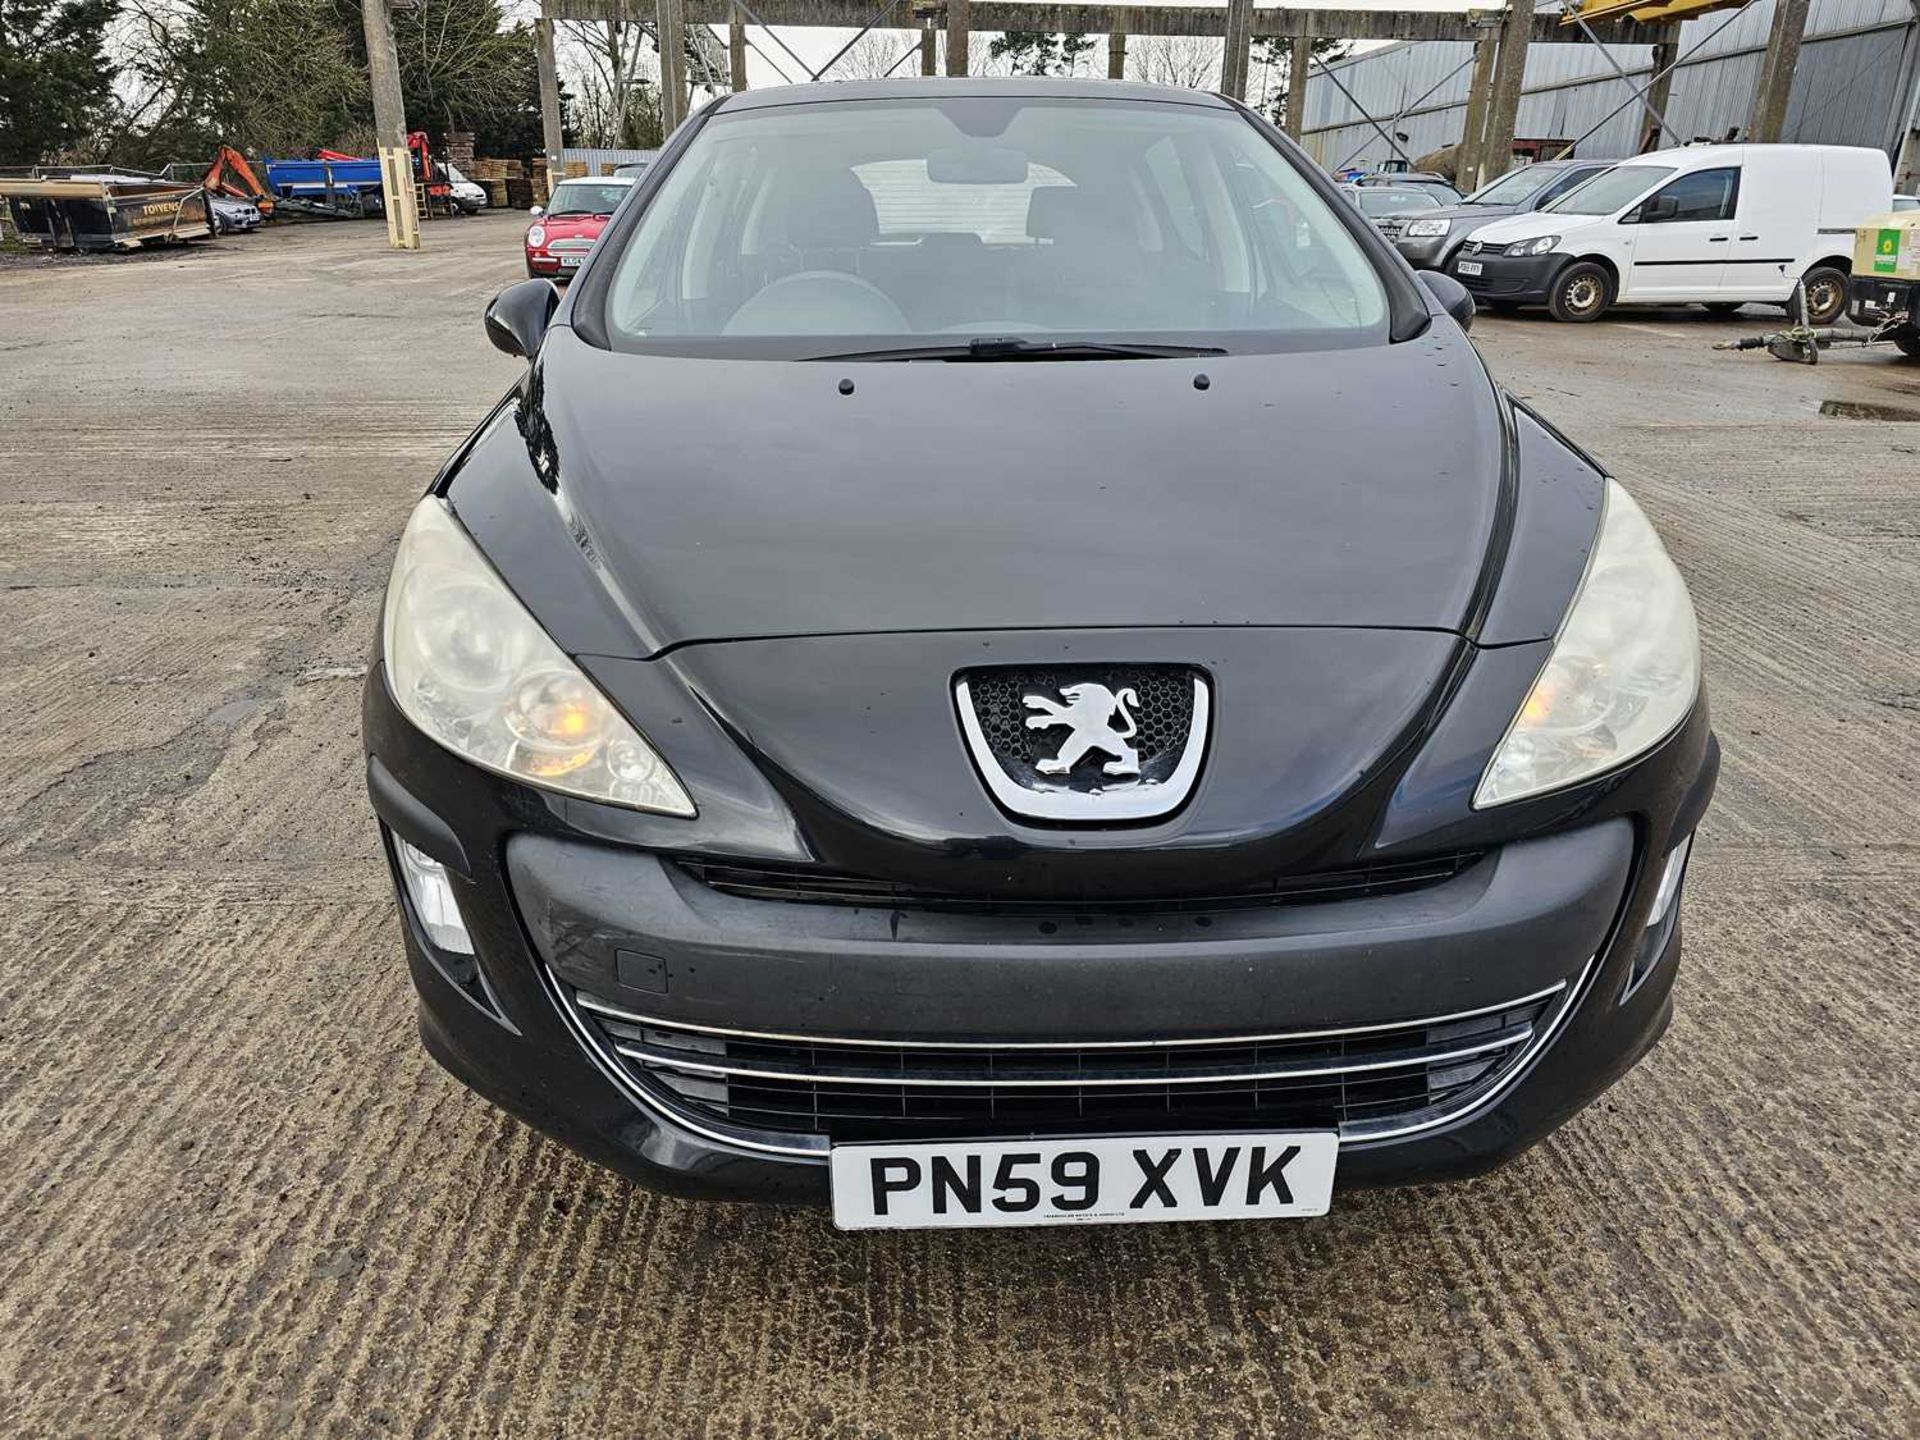 2009 Peugeot 308, 5 Speed, A/C (Reg. Docs. Available, Tested 07/24) - Image 3 of 28